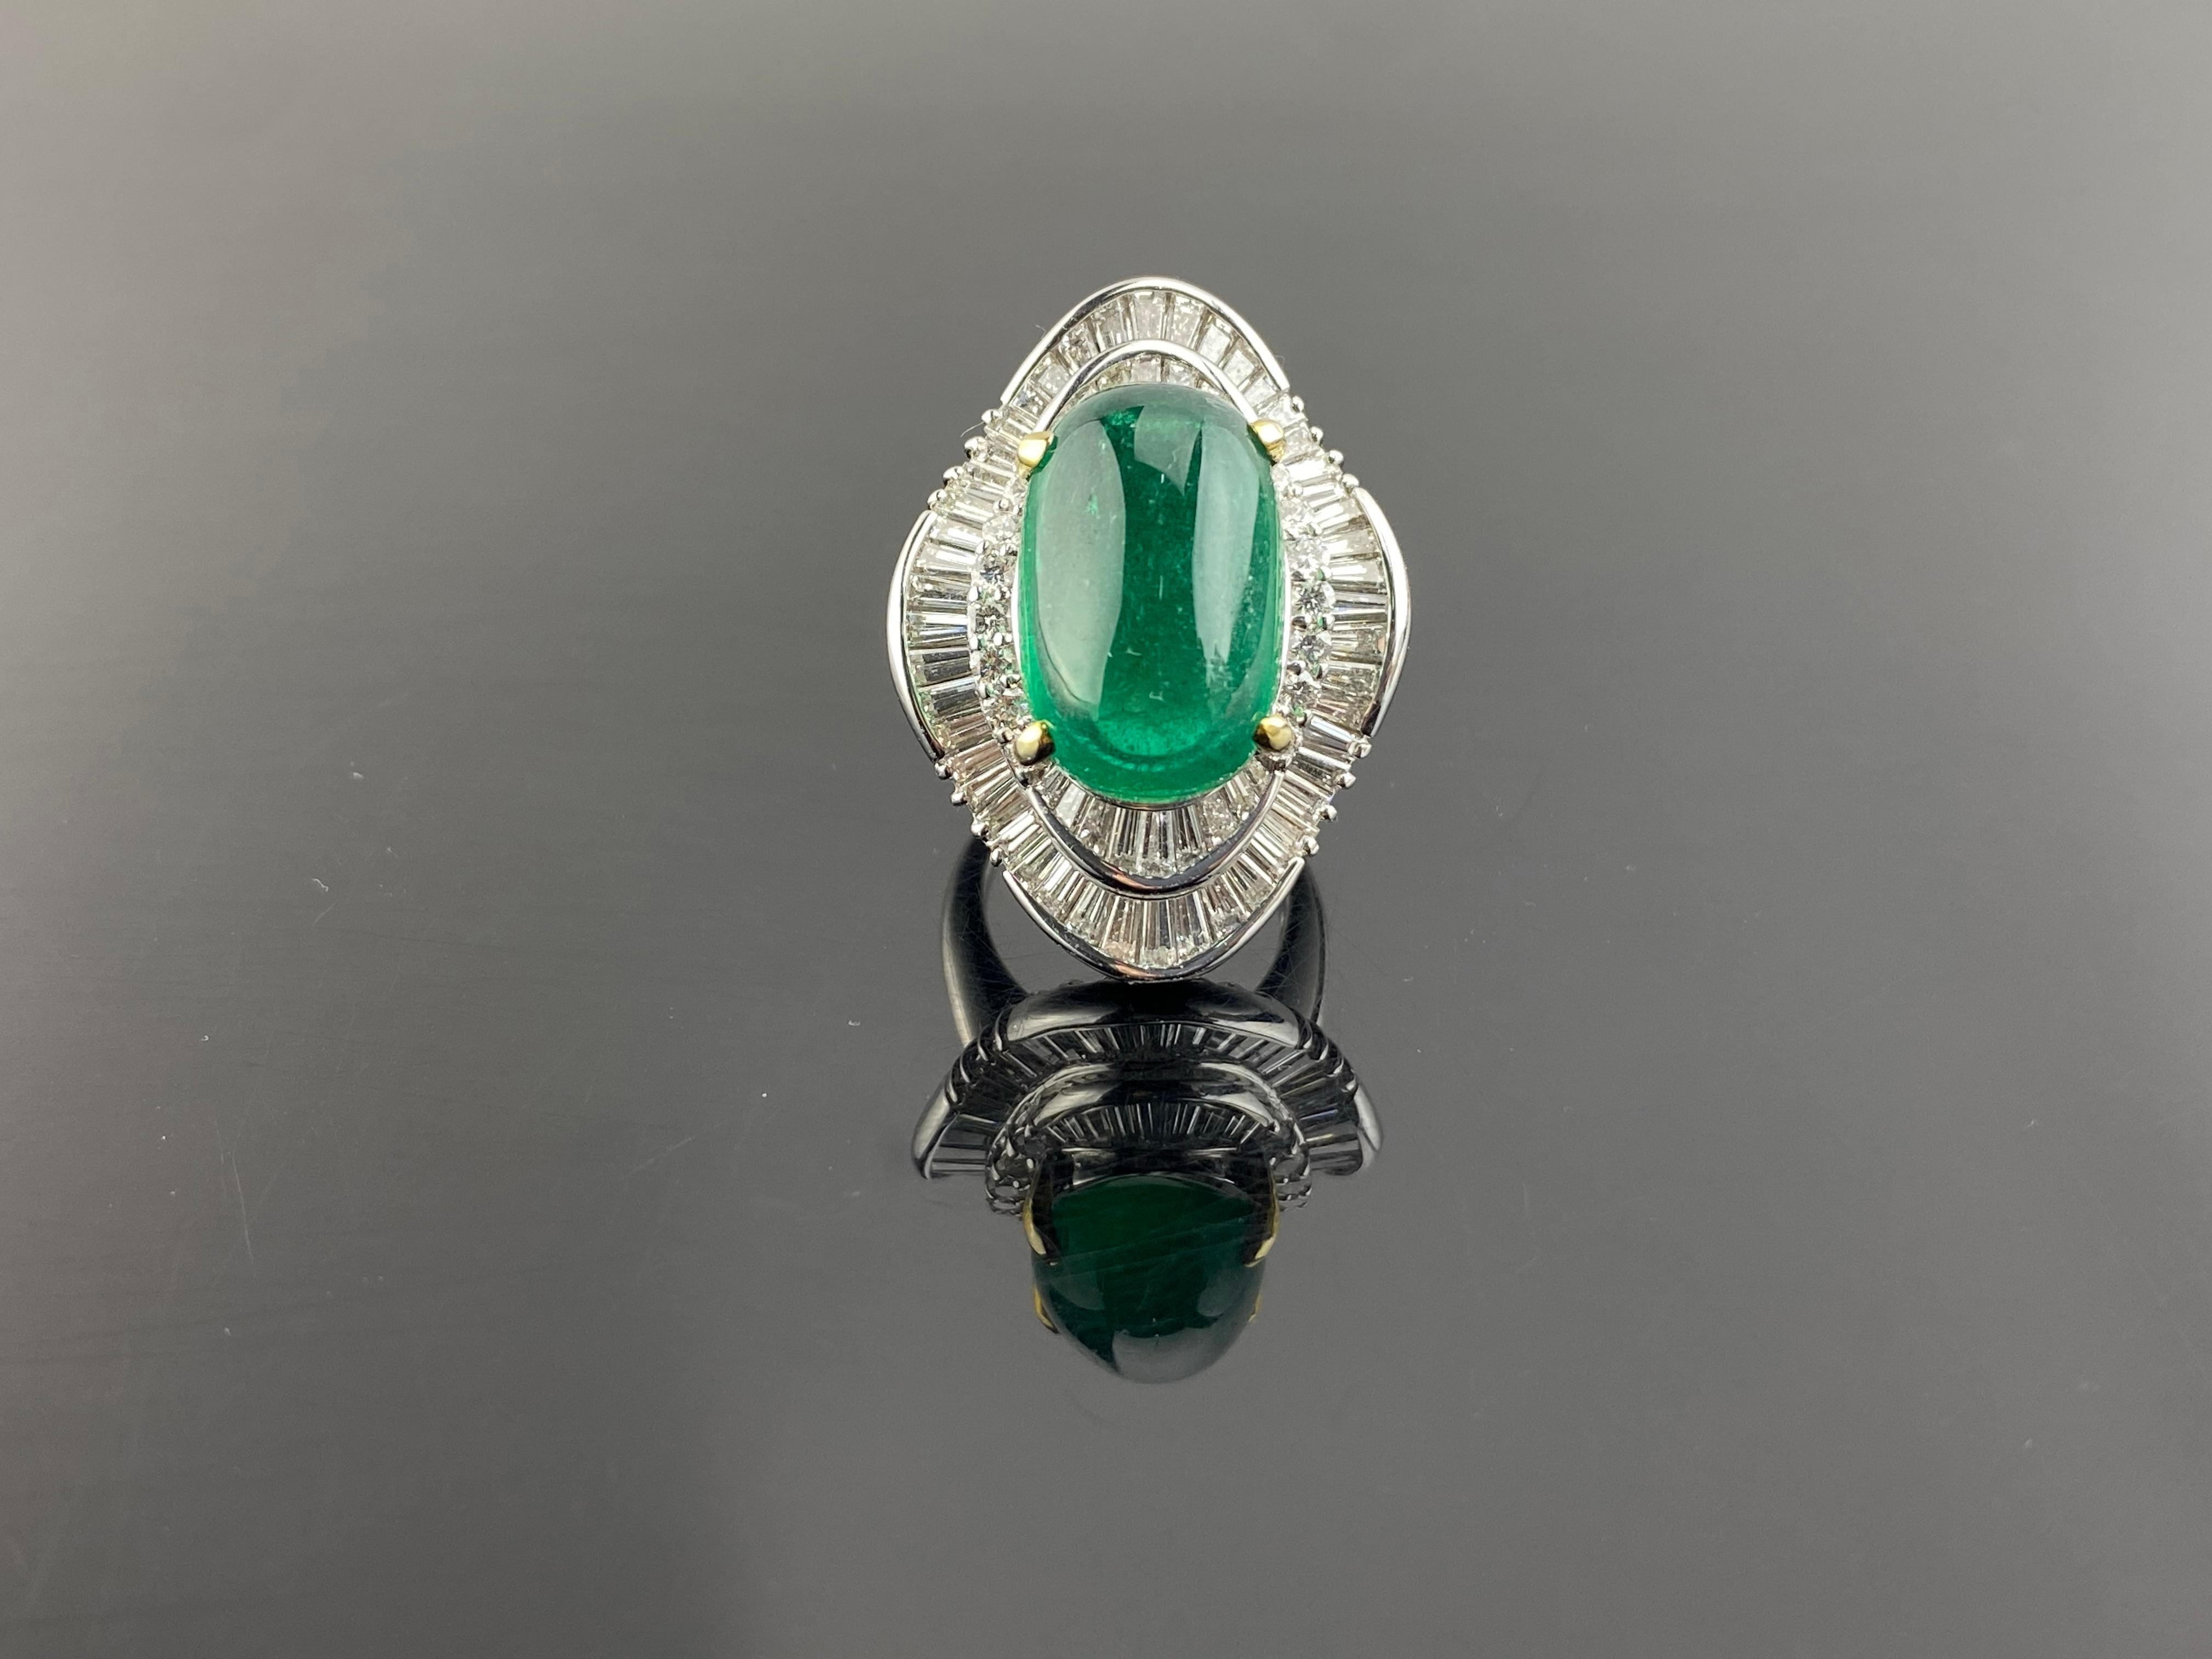 A beautiful, eye-catching 17.93 carat Zambian Emerald cabochon center stone, surrounded with 4.31 carat VVS quality White Diamond - all set in platinum. The Emerald has a great vivid green color, and is absolutely transparent with a stunning